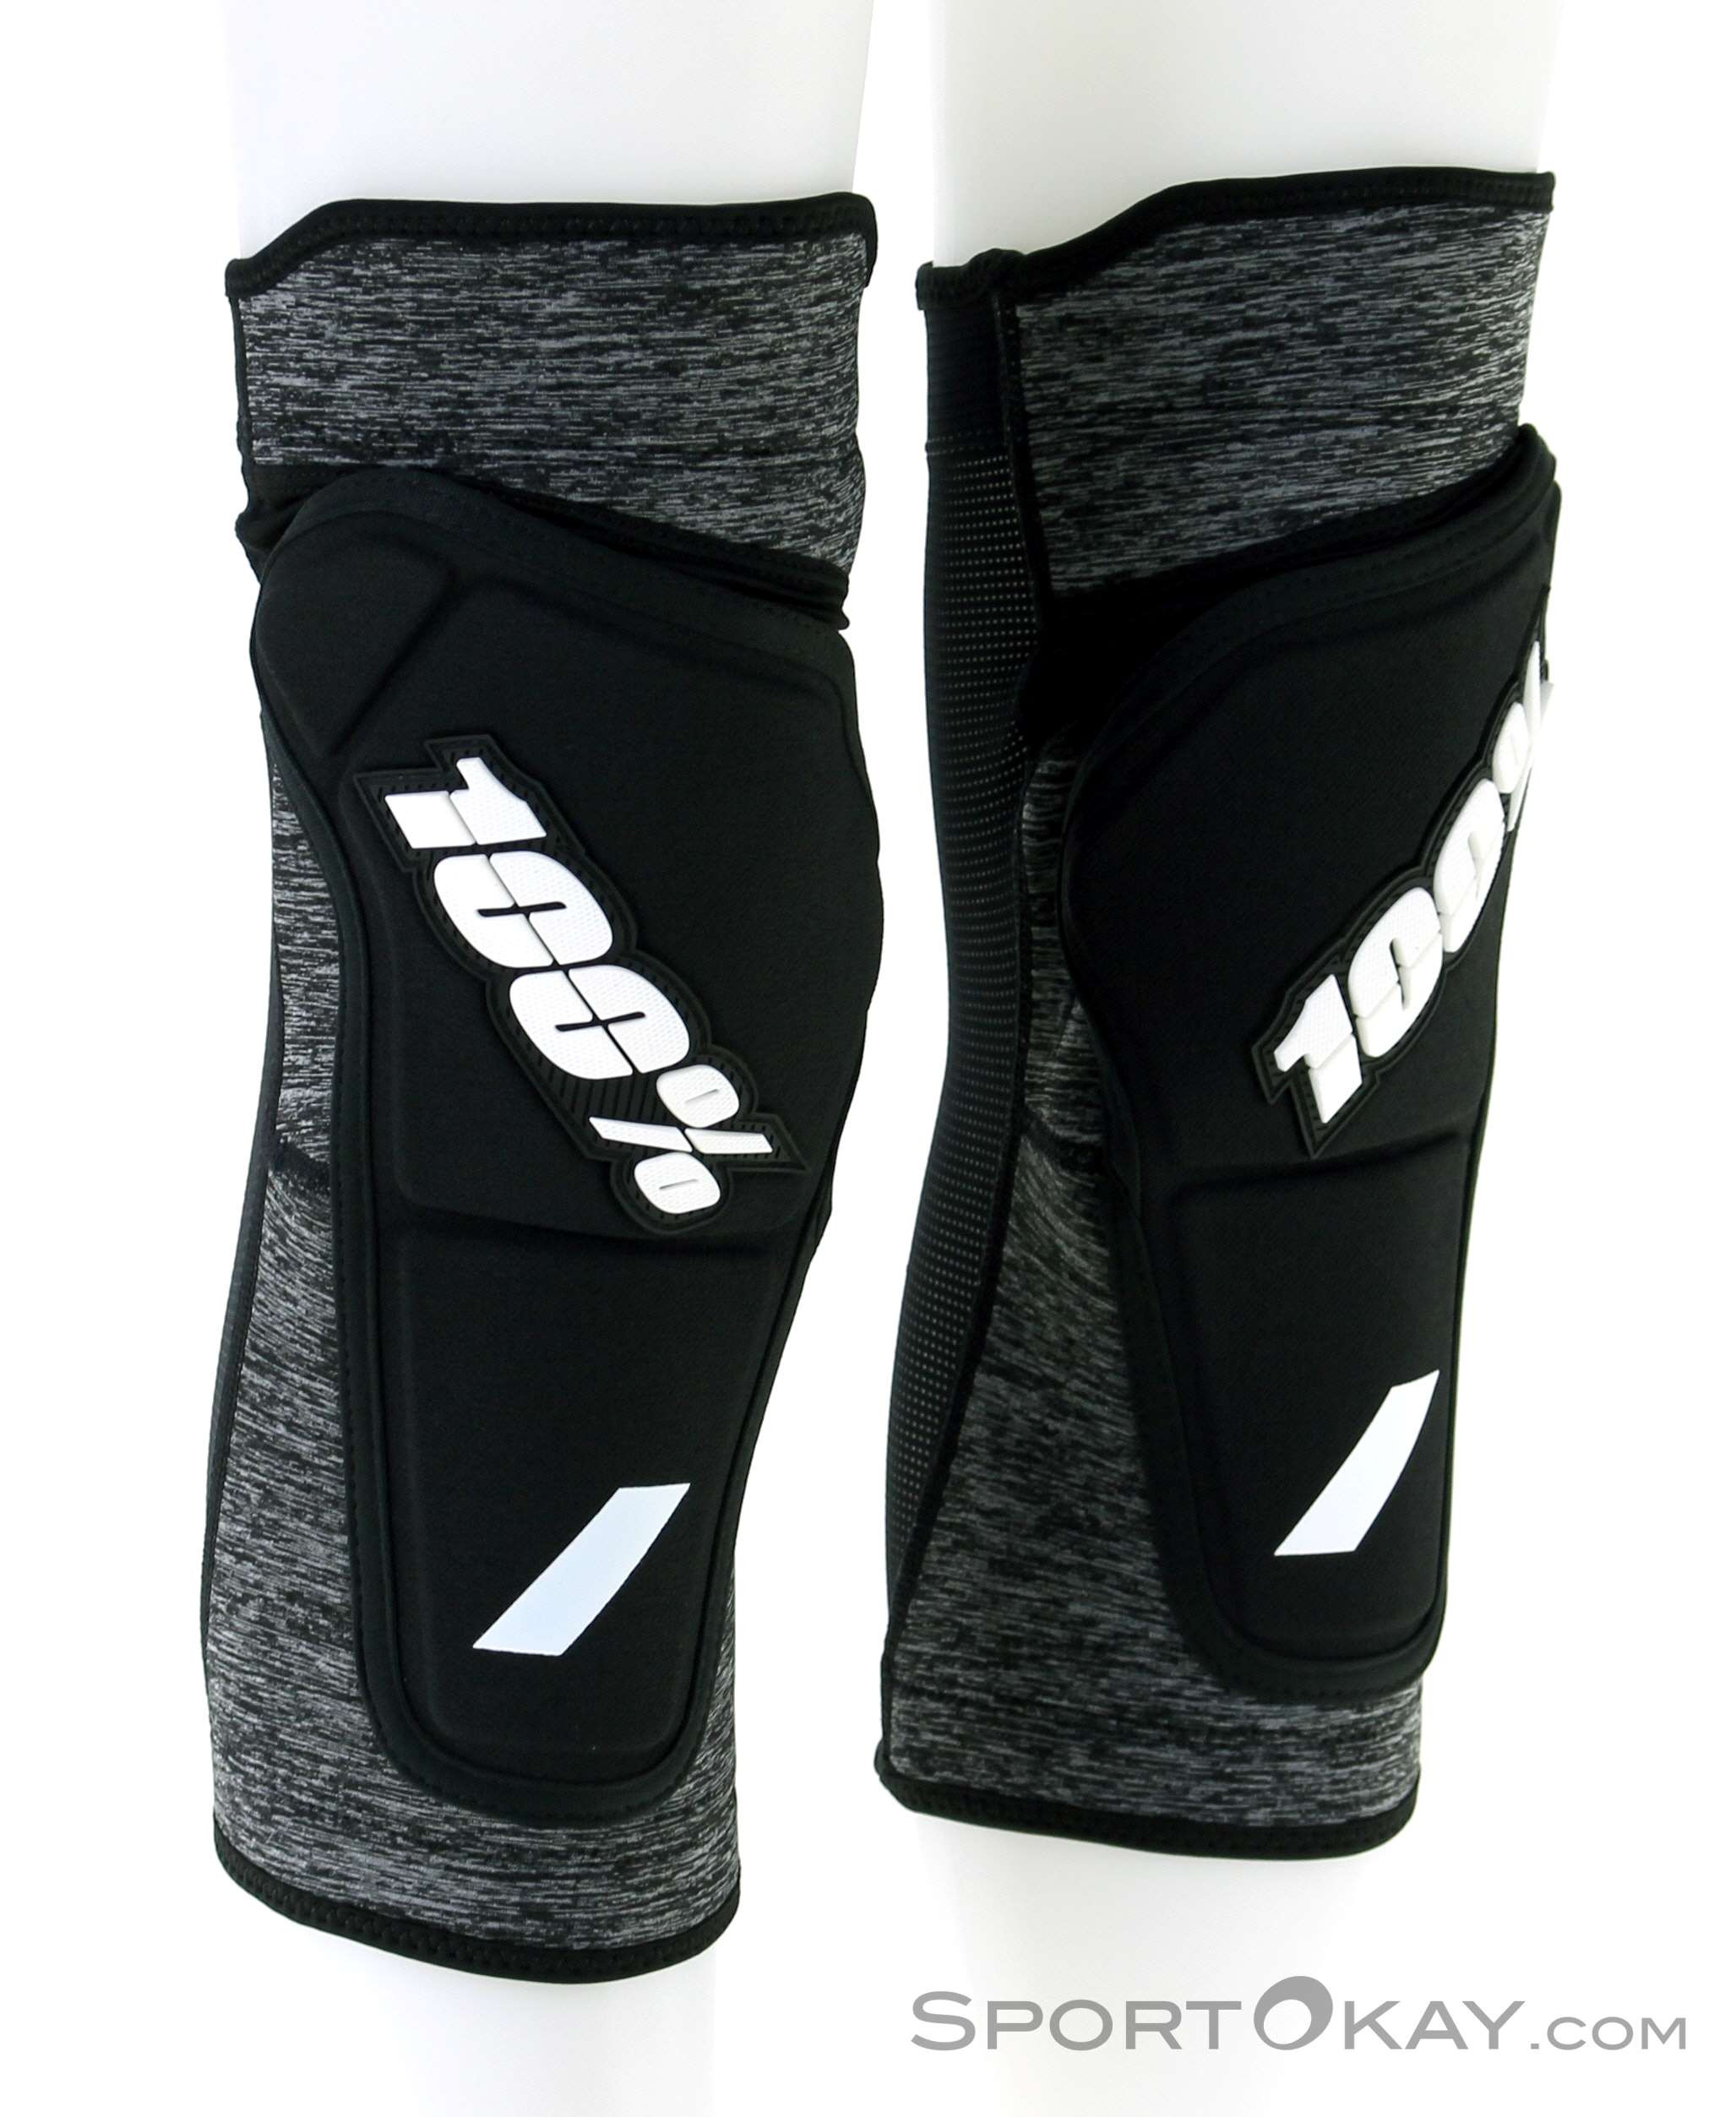 Black/Grey Ride 100% RIDECAMP Knee Guards/Pads Size LG Color